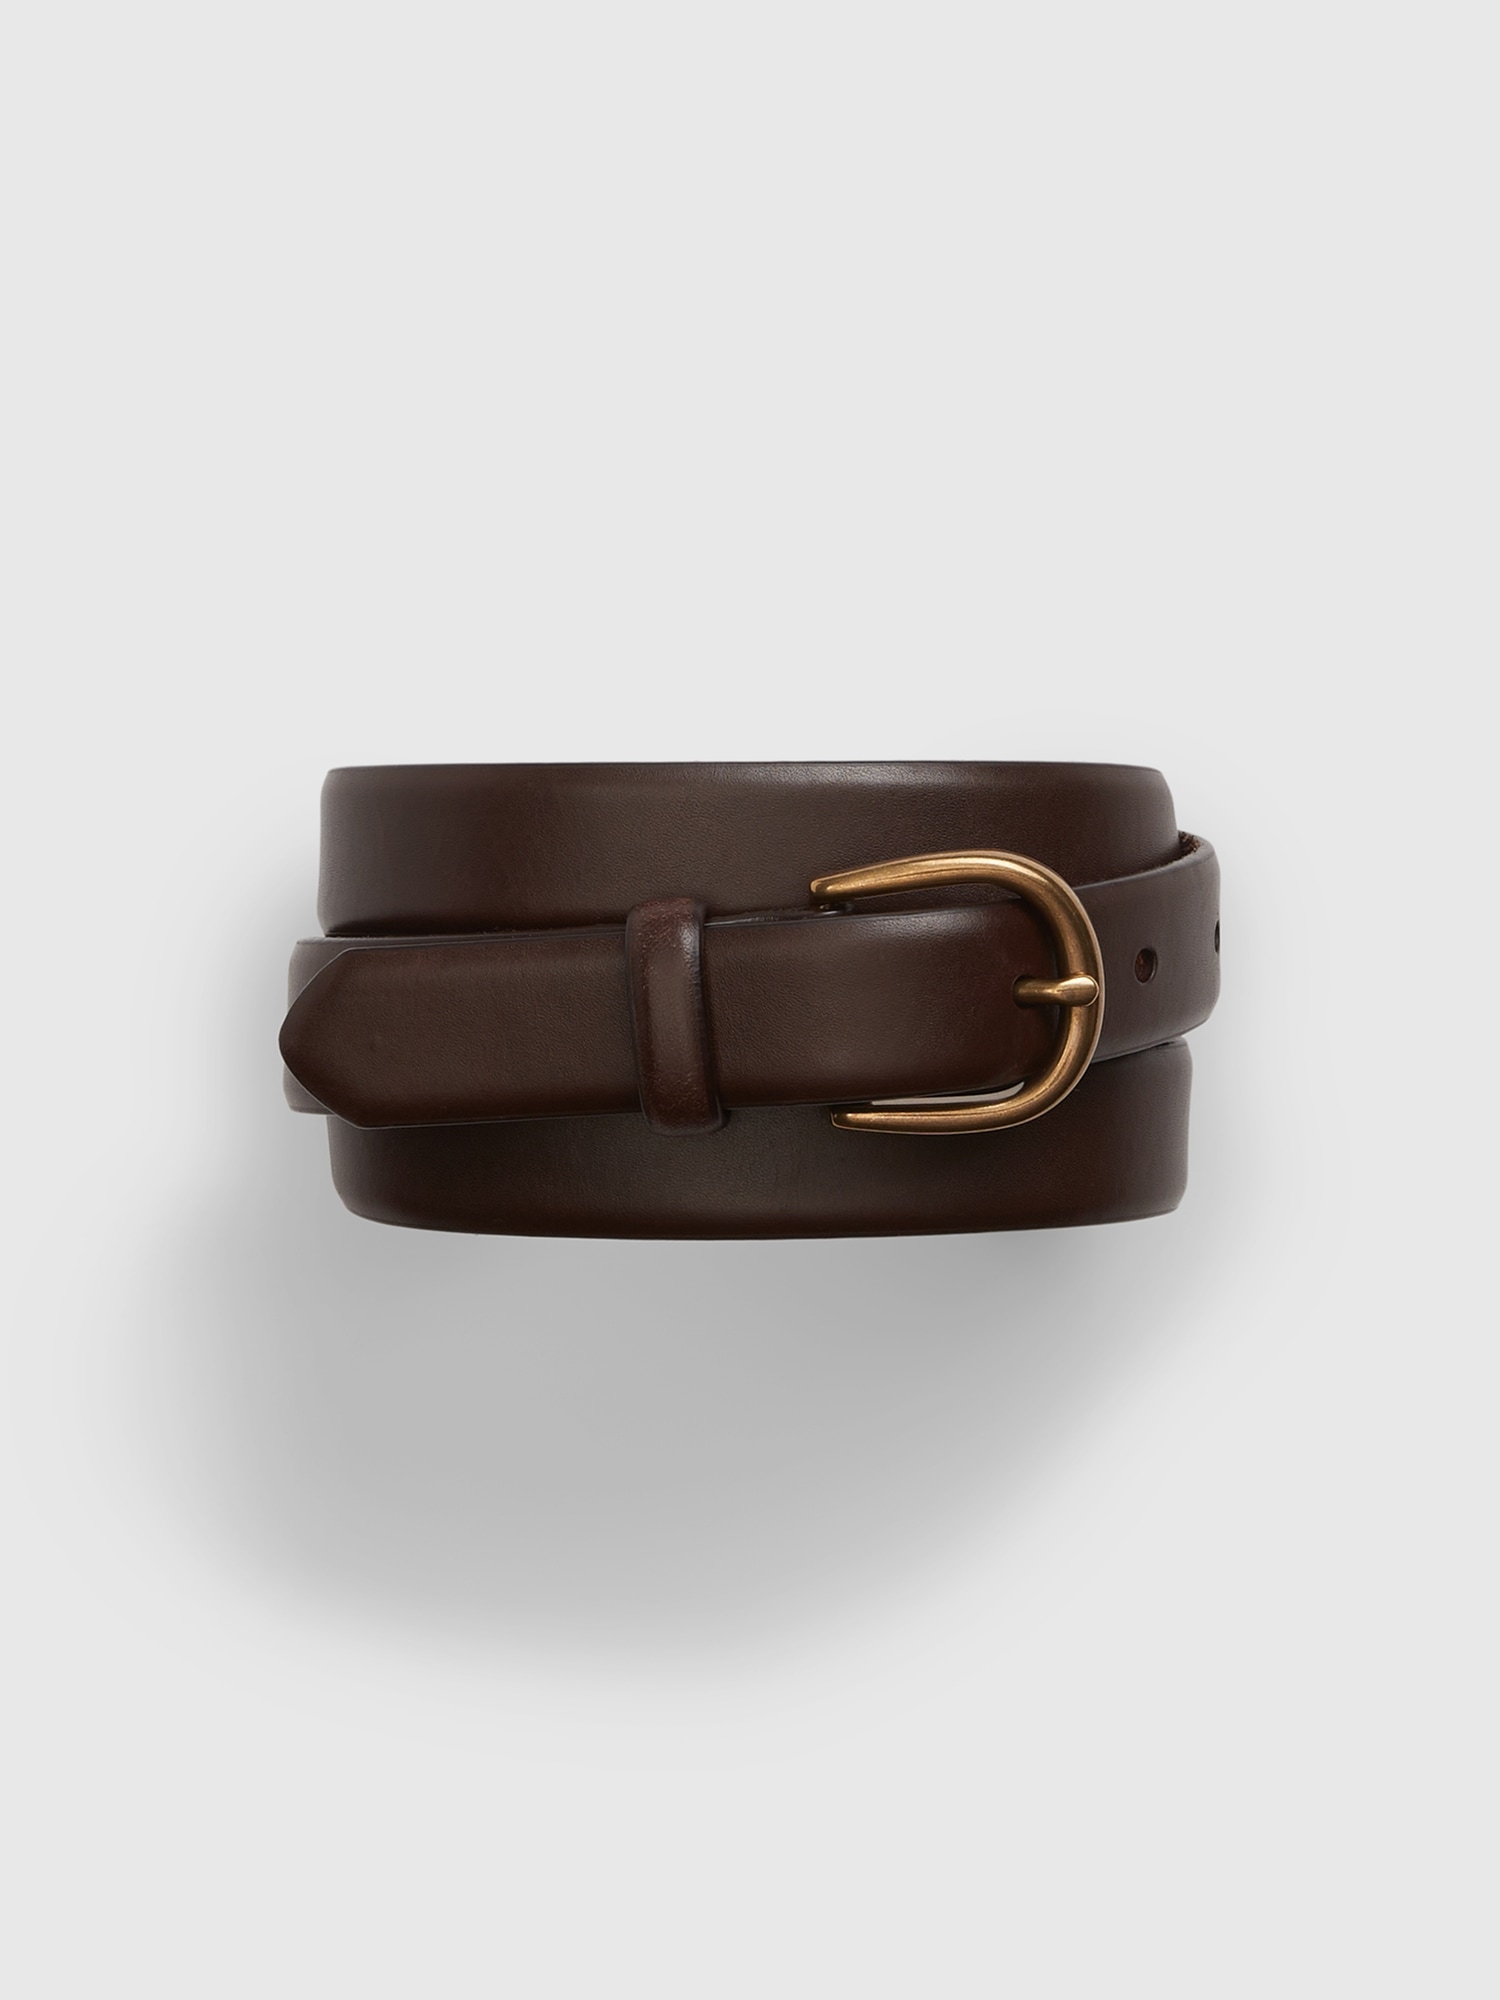 Men's Calf Leather Belt Black/Brown With Metal Buckle For Pants